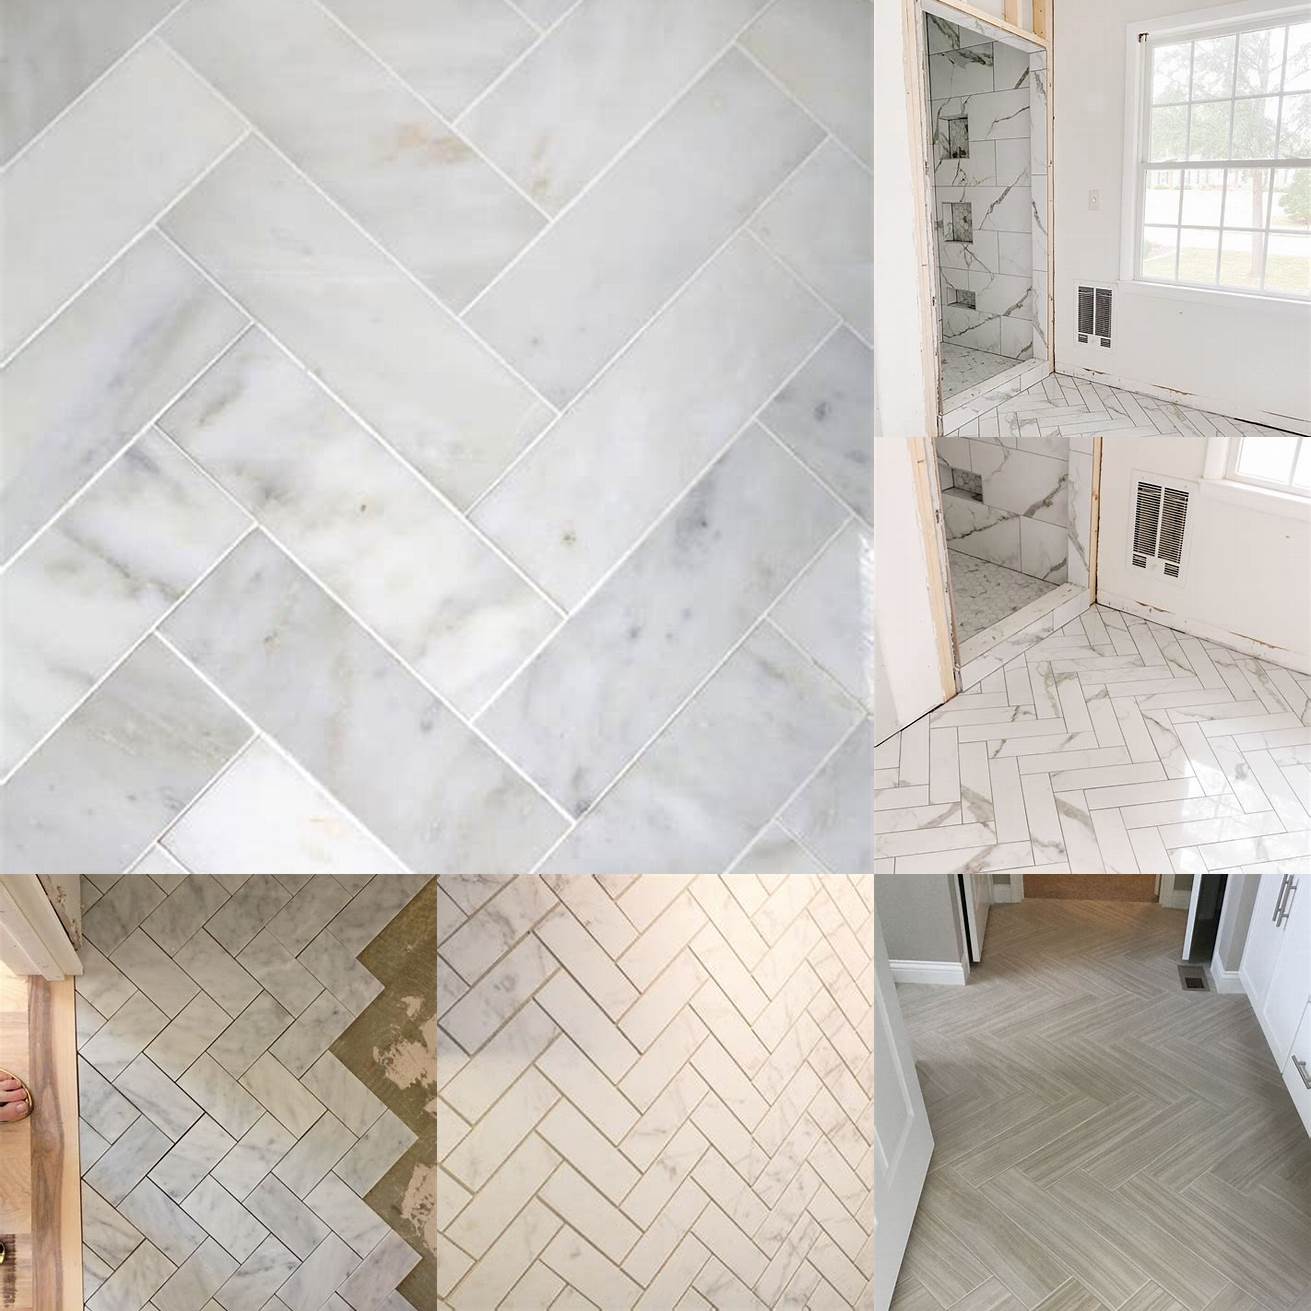 Marble tiles with a herringbone pattern